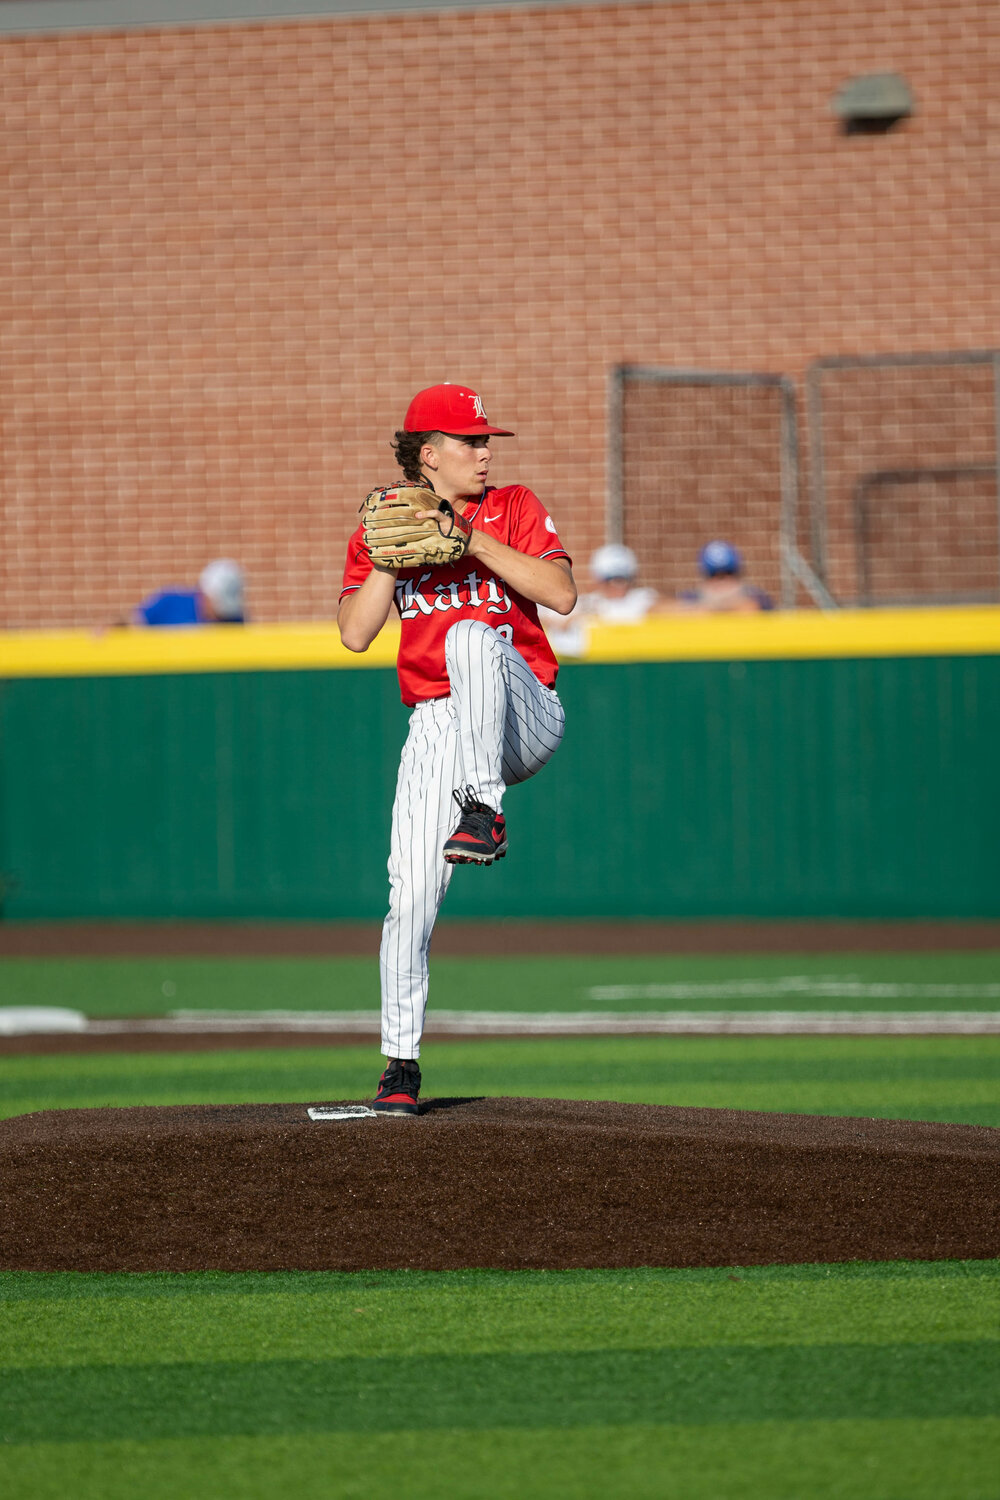 Caleb Koger pitches during Wednesday's Regional Semifinal between Katy and Clear Springs at Deer Park.